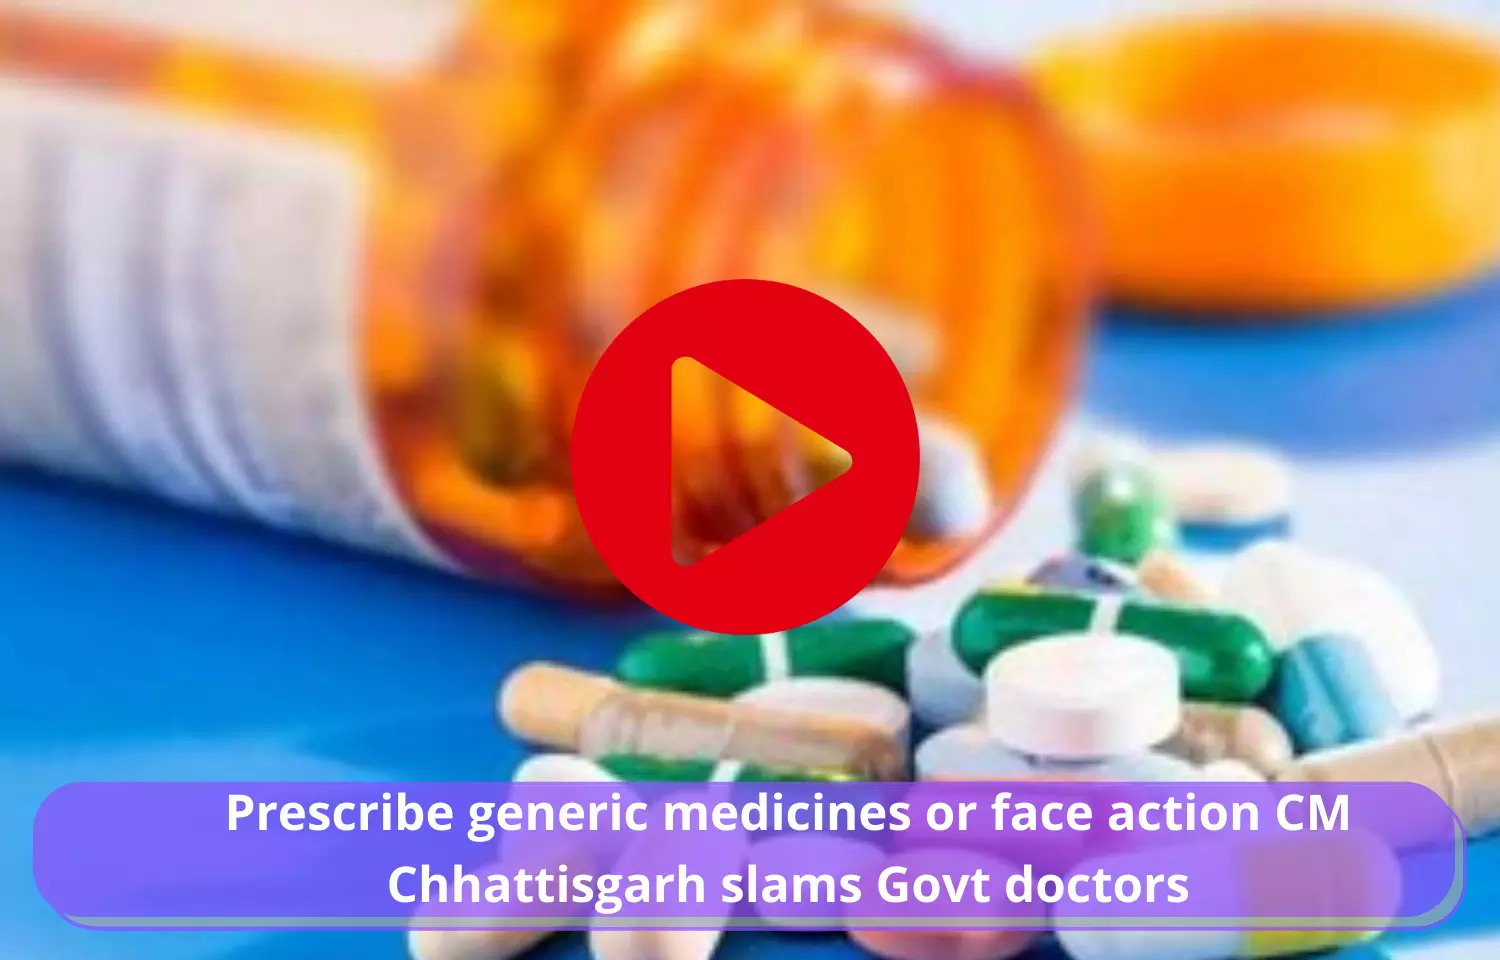 Govt hospital doctors to face action if they prescribe branded medicines instead of generic drugs: Chhattisgarh CM